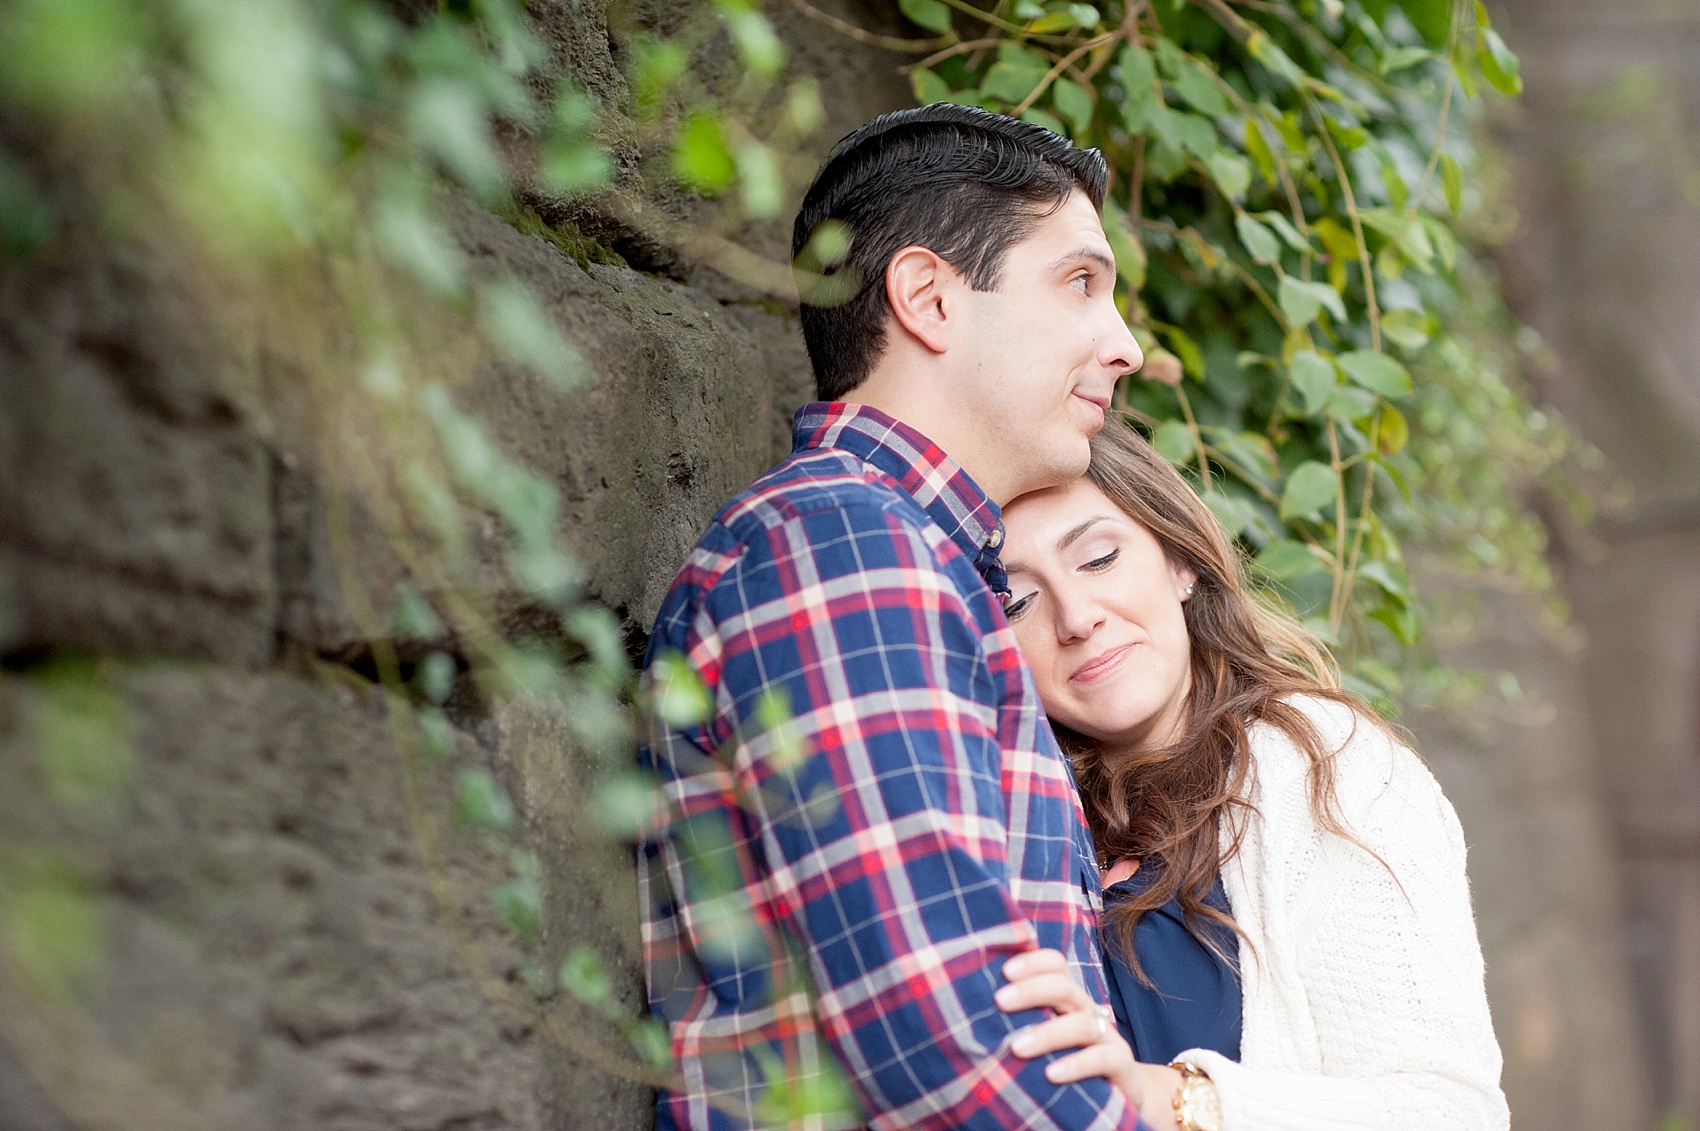 Central Park engagement photos in the fall. New York City wedding photographer, Mikkel Paige Photography.